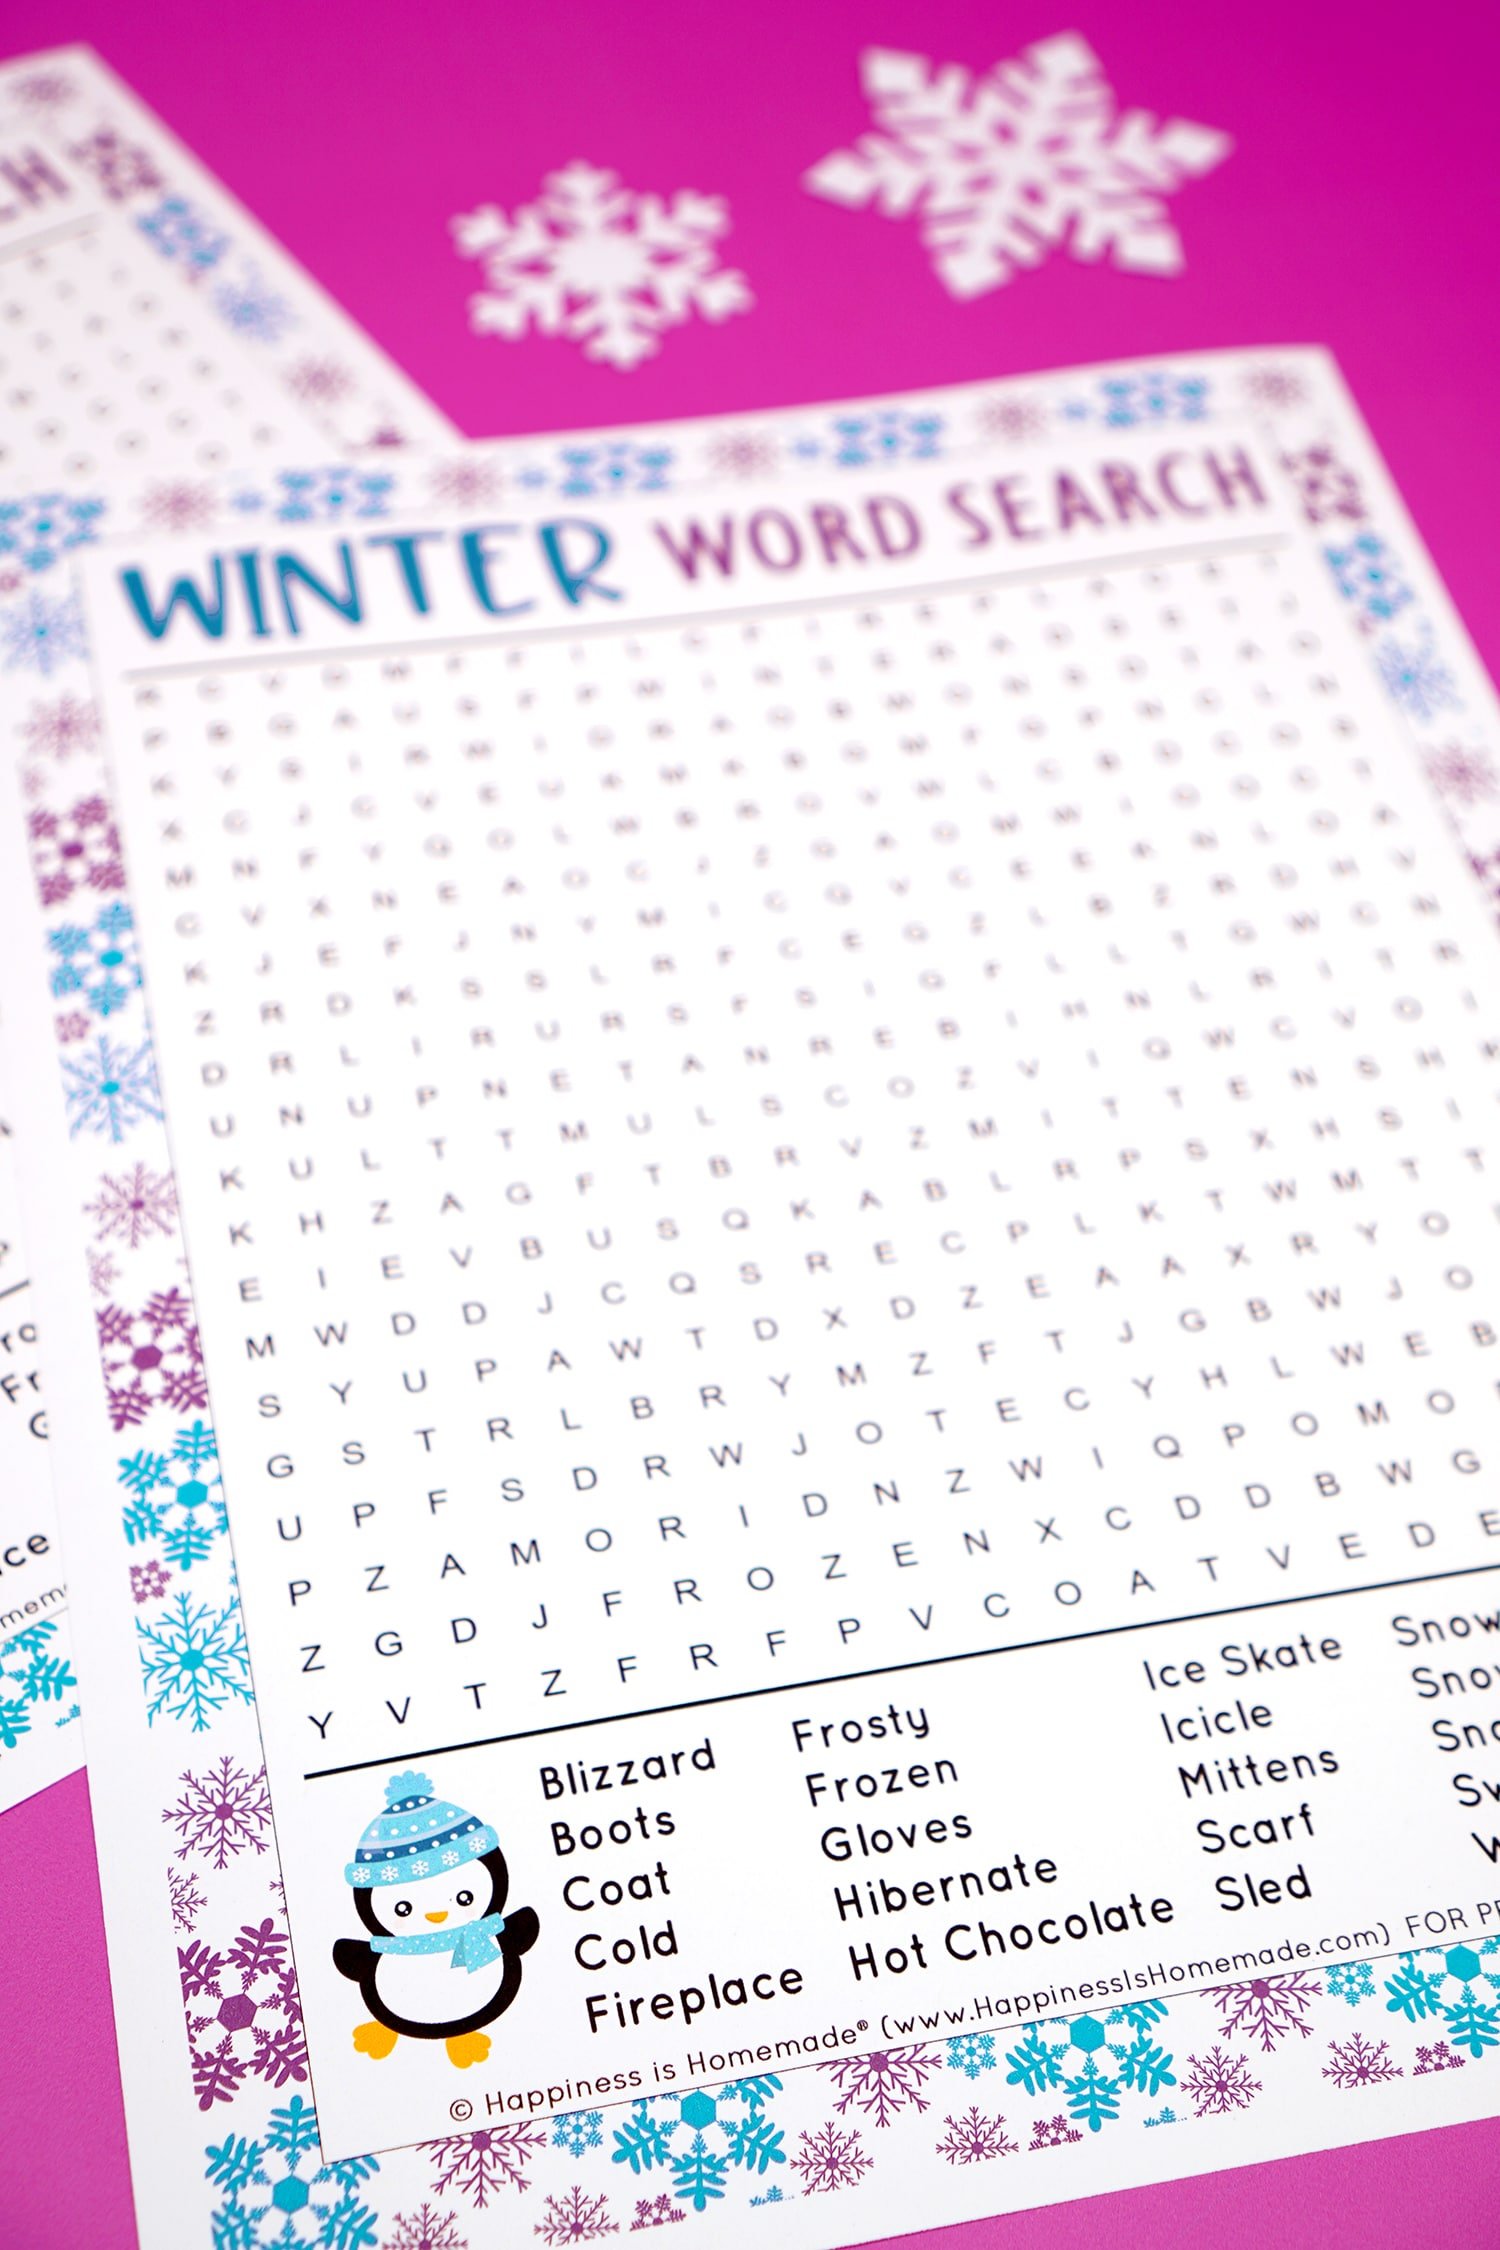 Close up of winter word search word list and penguin graphic on a purple background with snowflakes